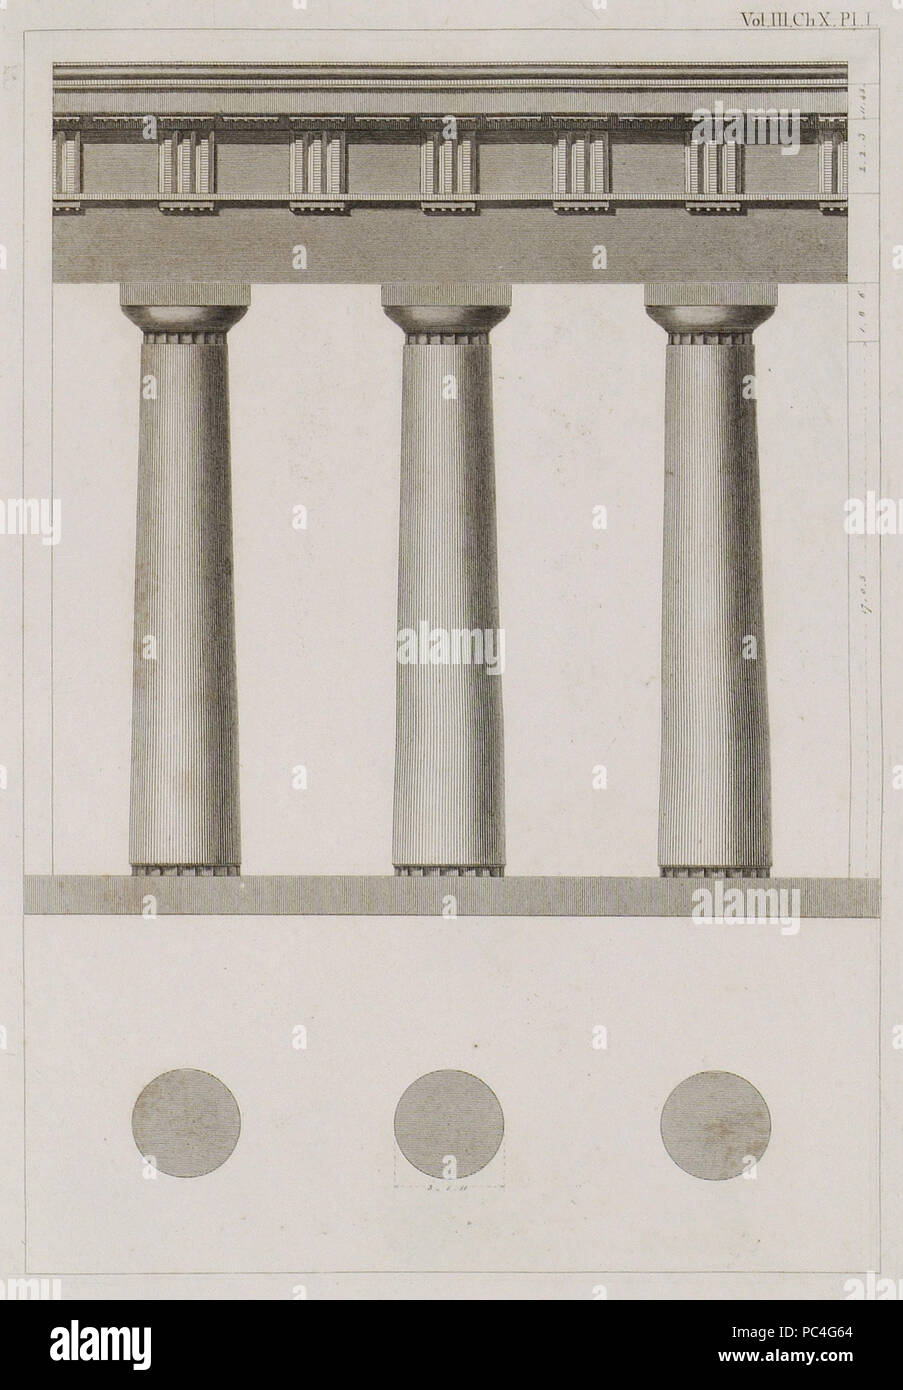 598 The plan and elevation of two Doric columns of the Temple of Apollo at Delos - Stuart James &amp; Revett Nicholas - 1794 Stock Photo